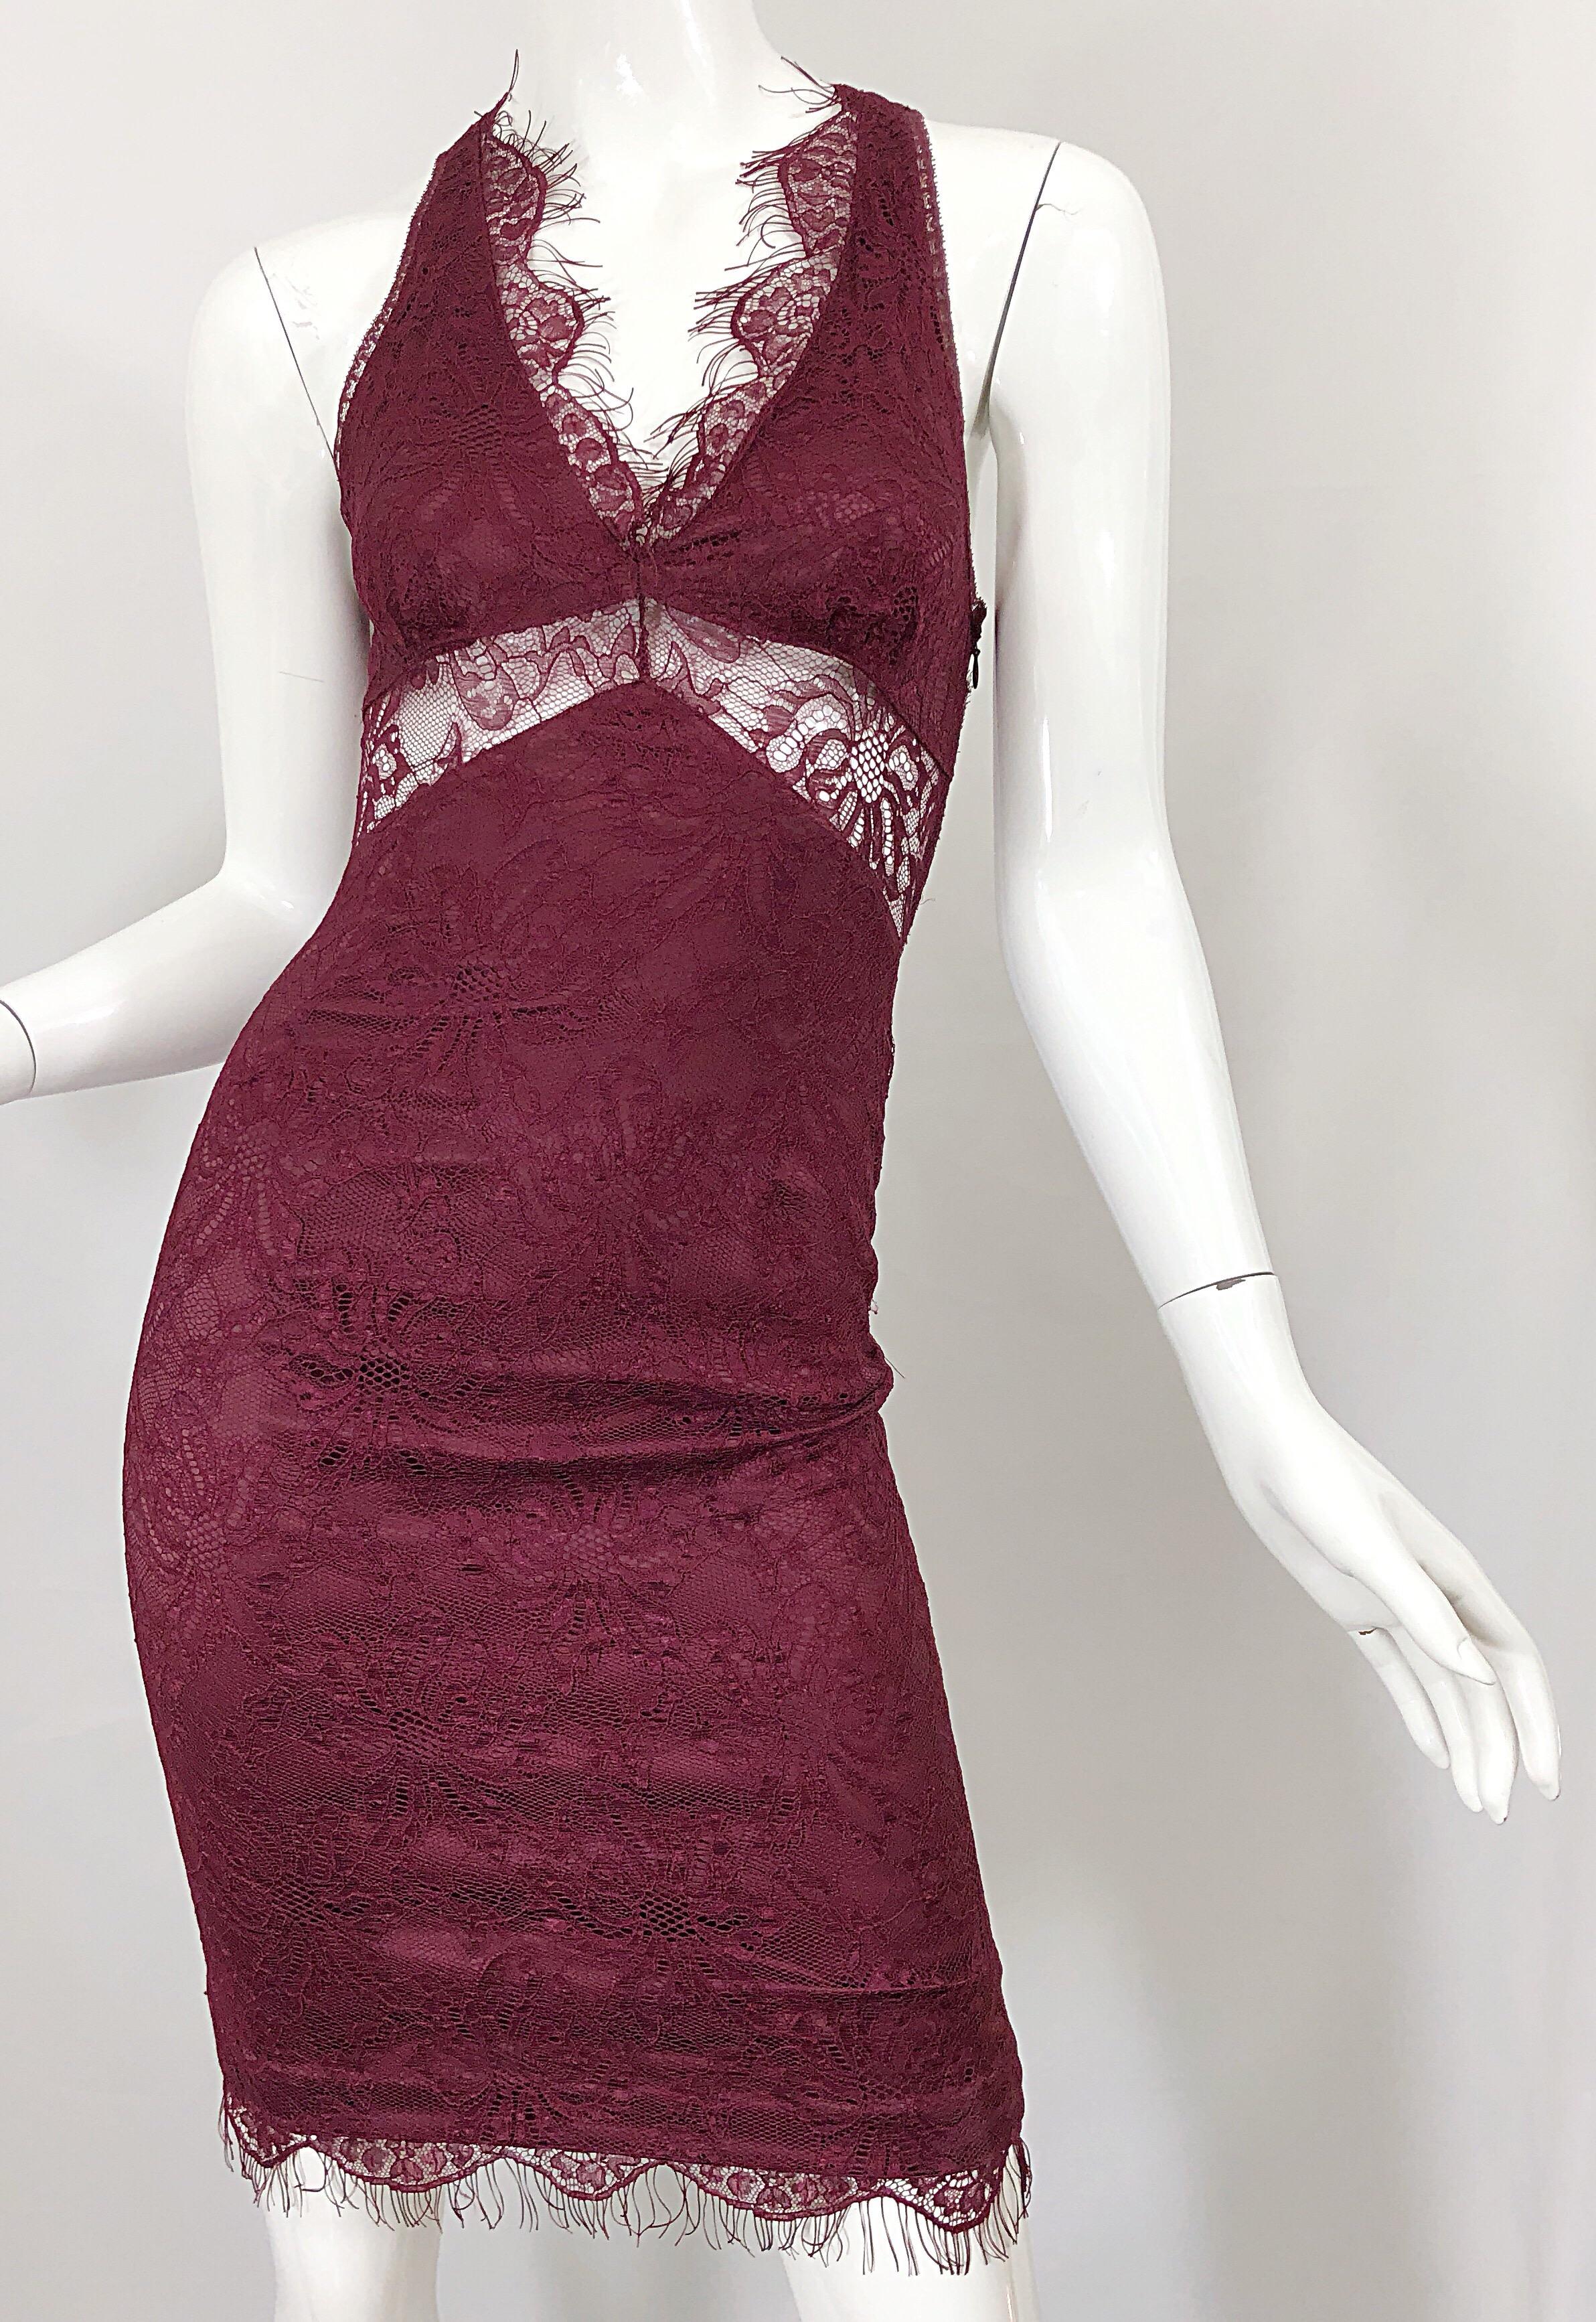 Dolce & Gabbana 1990s Burgundy Merlot Sexy Lace Bodycon Cut Out Vintage Dress 38 For Sale 3